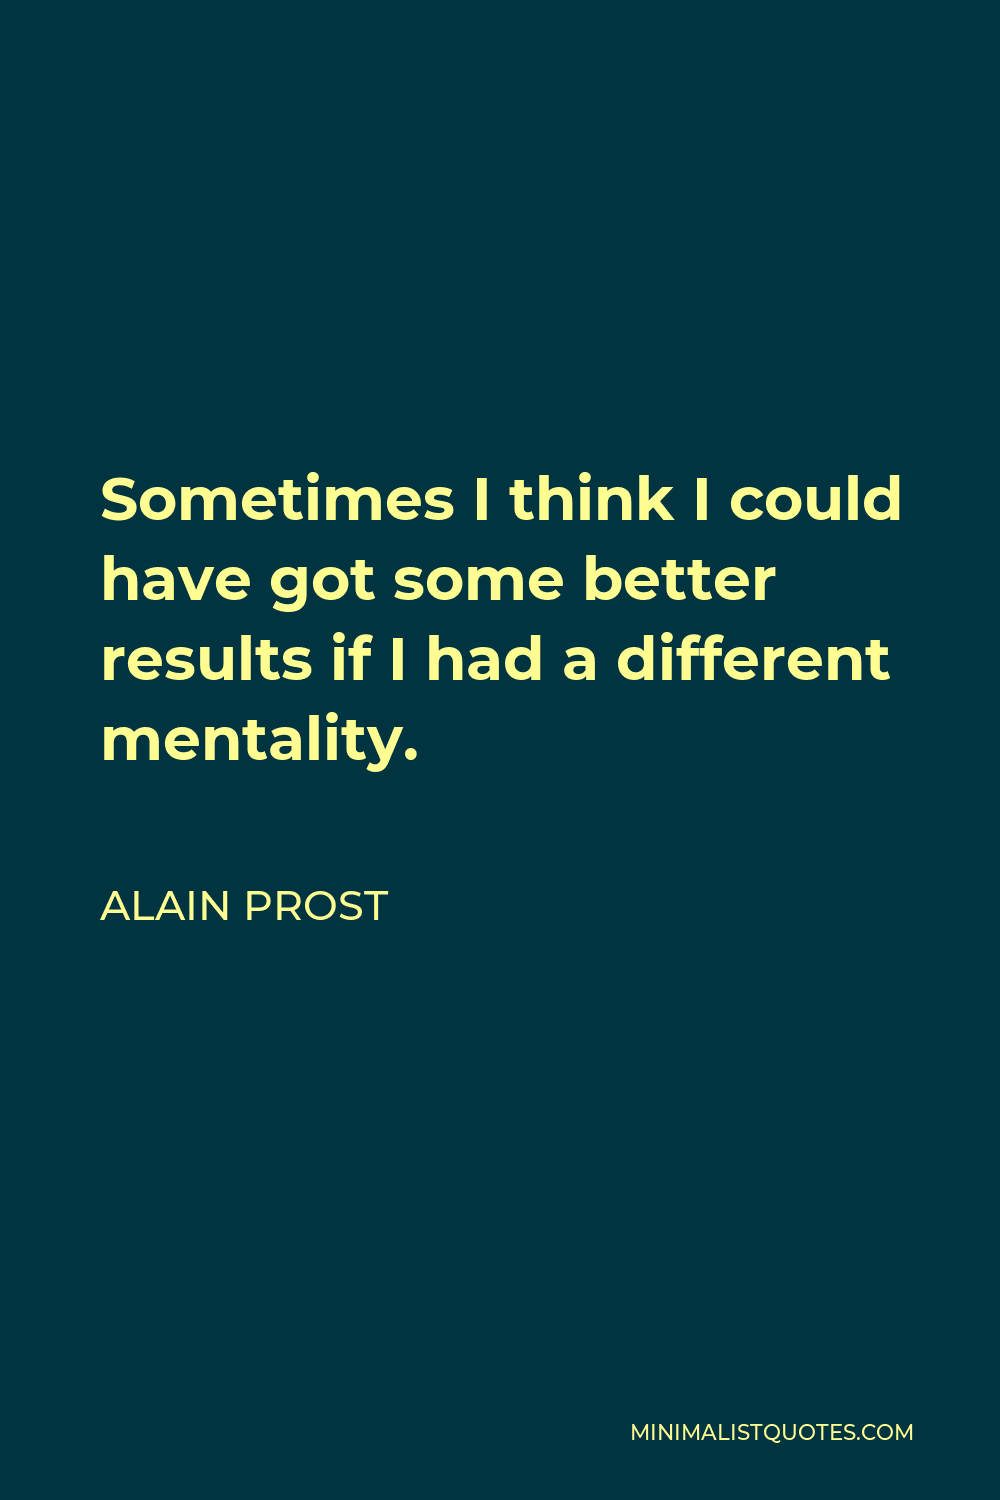 Alain Prost Quote - Sometimes I think I could have got some better results if I had a different mentality.